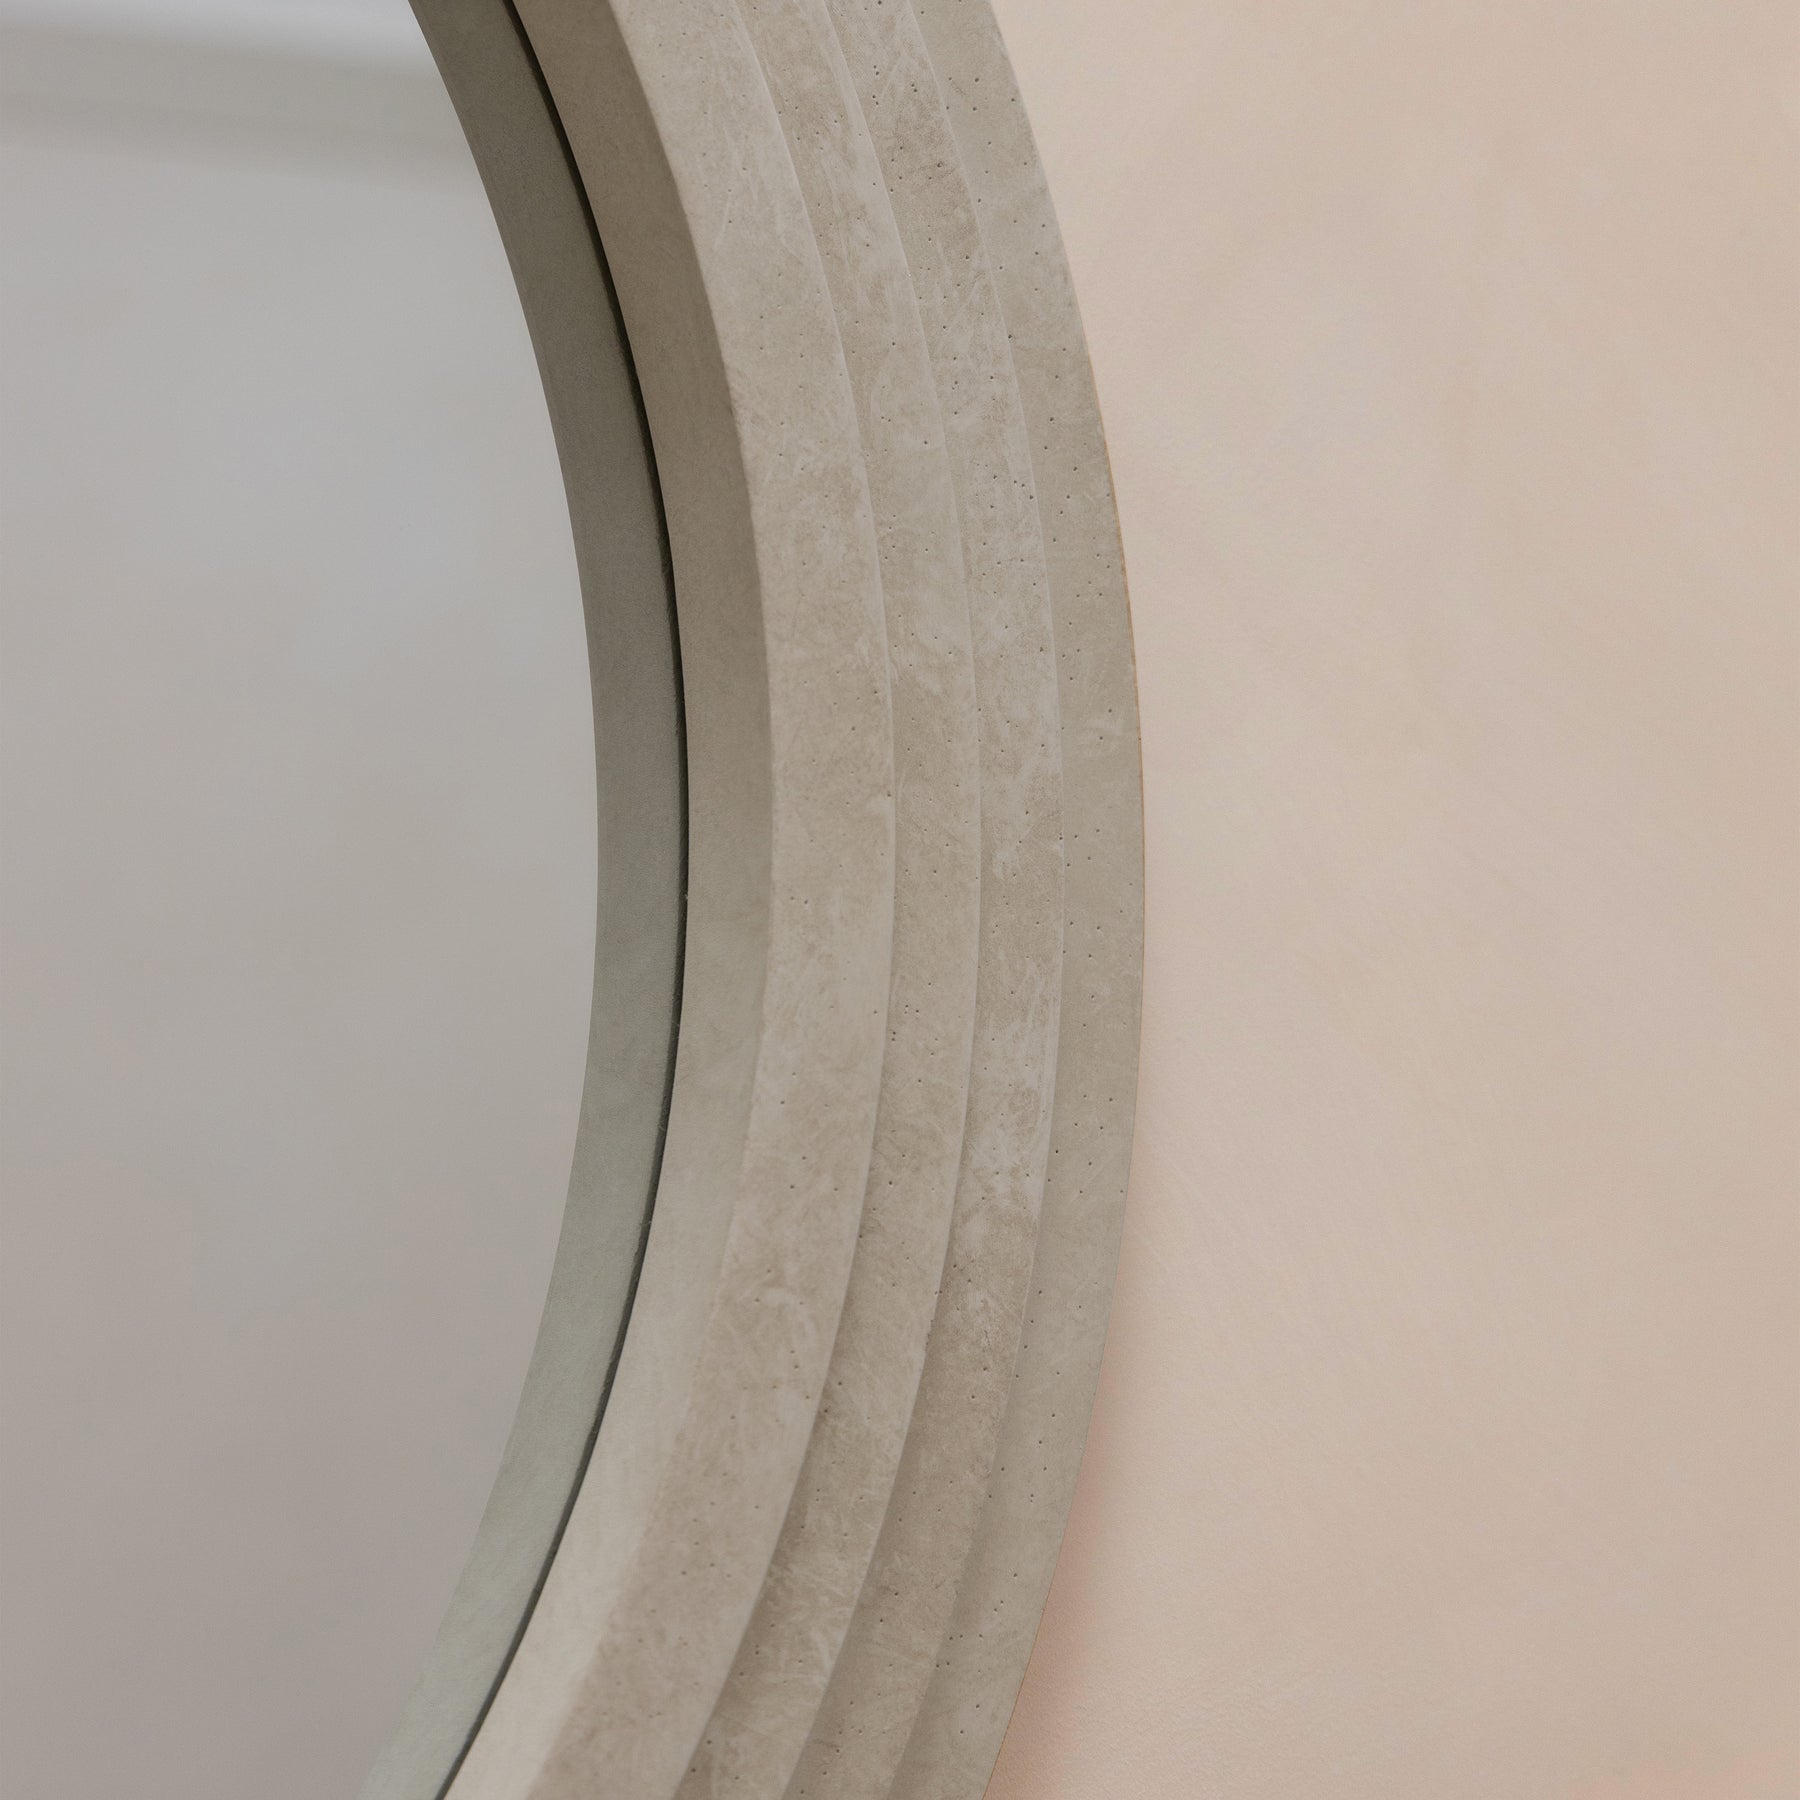 Round Concrete Wall Mirror stepped curve